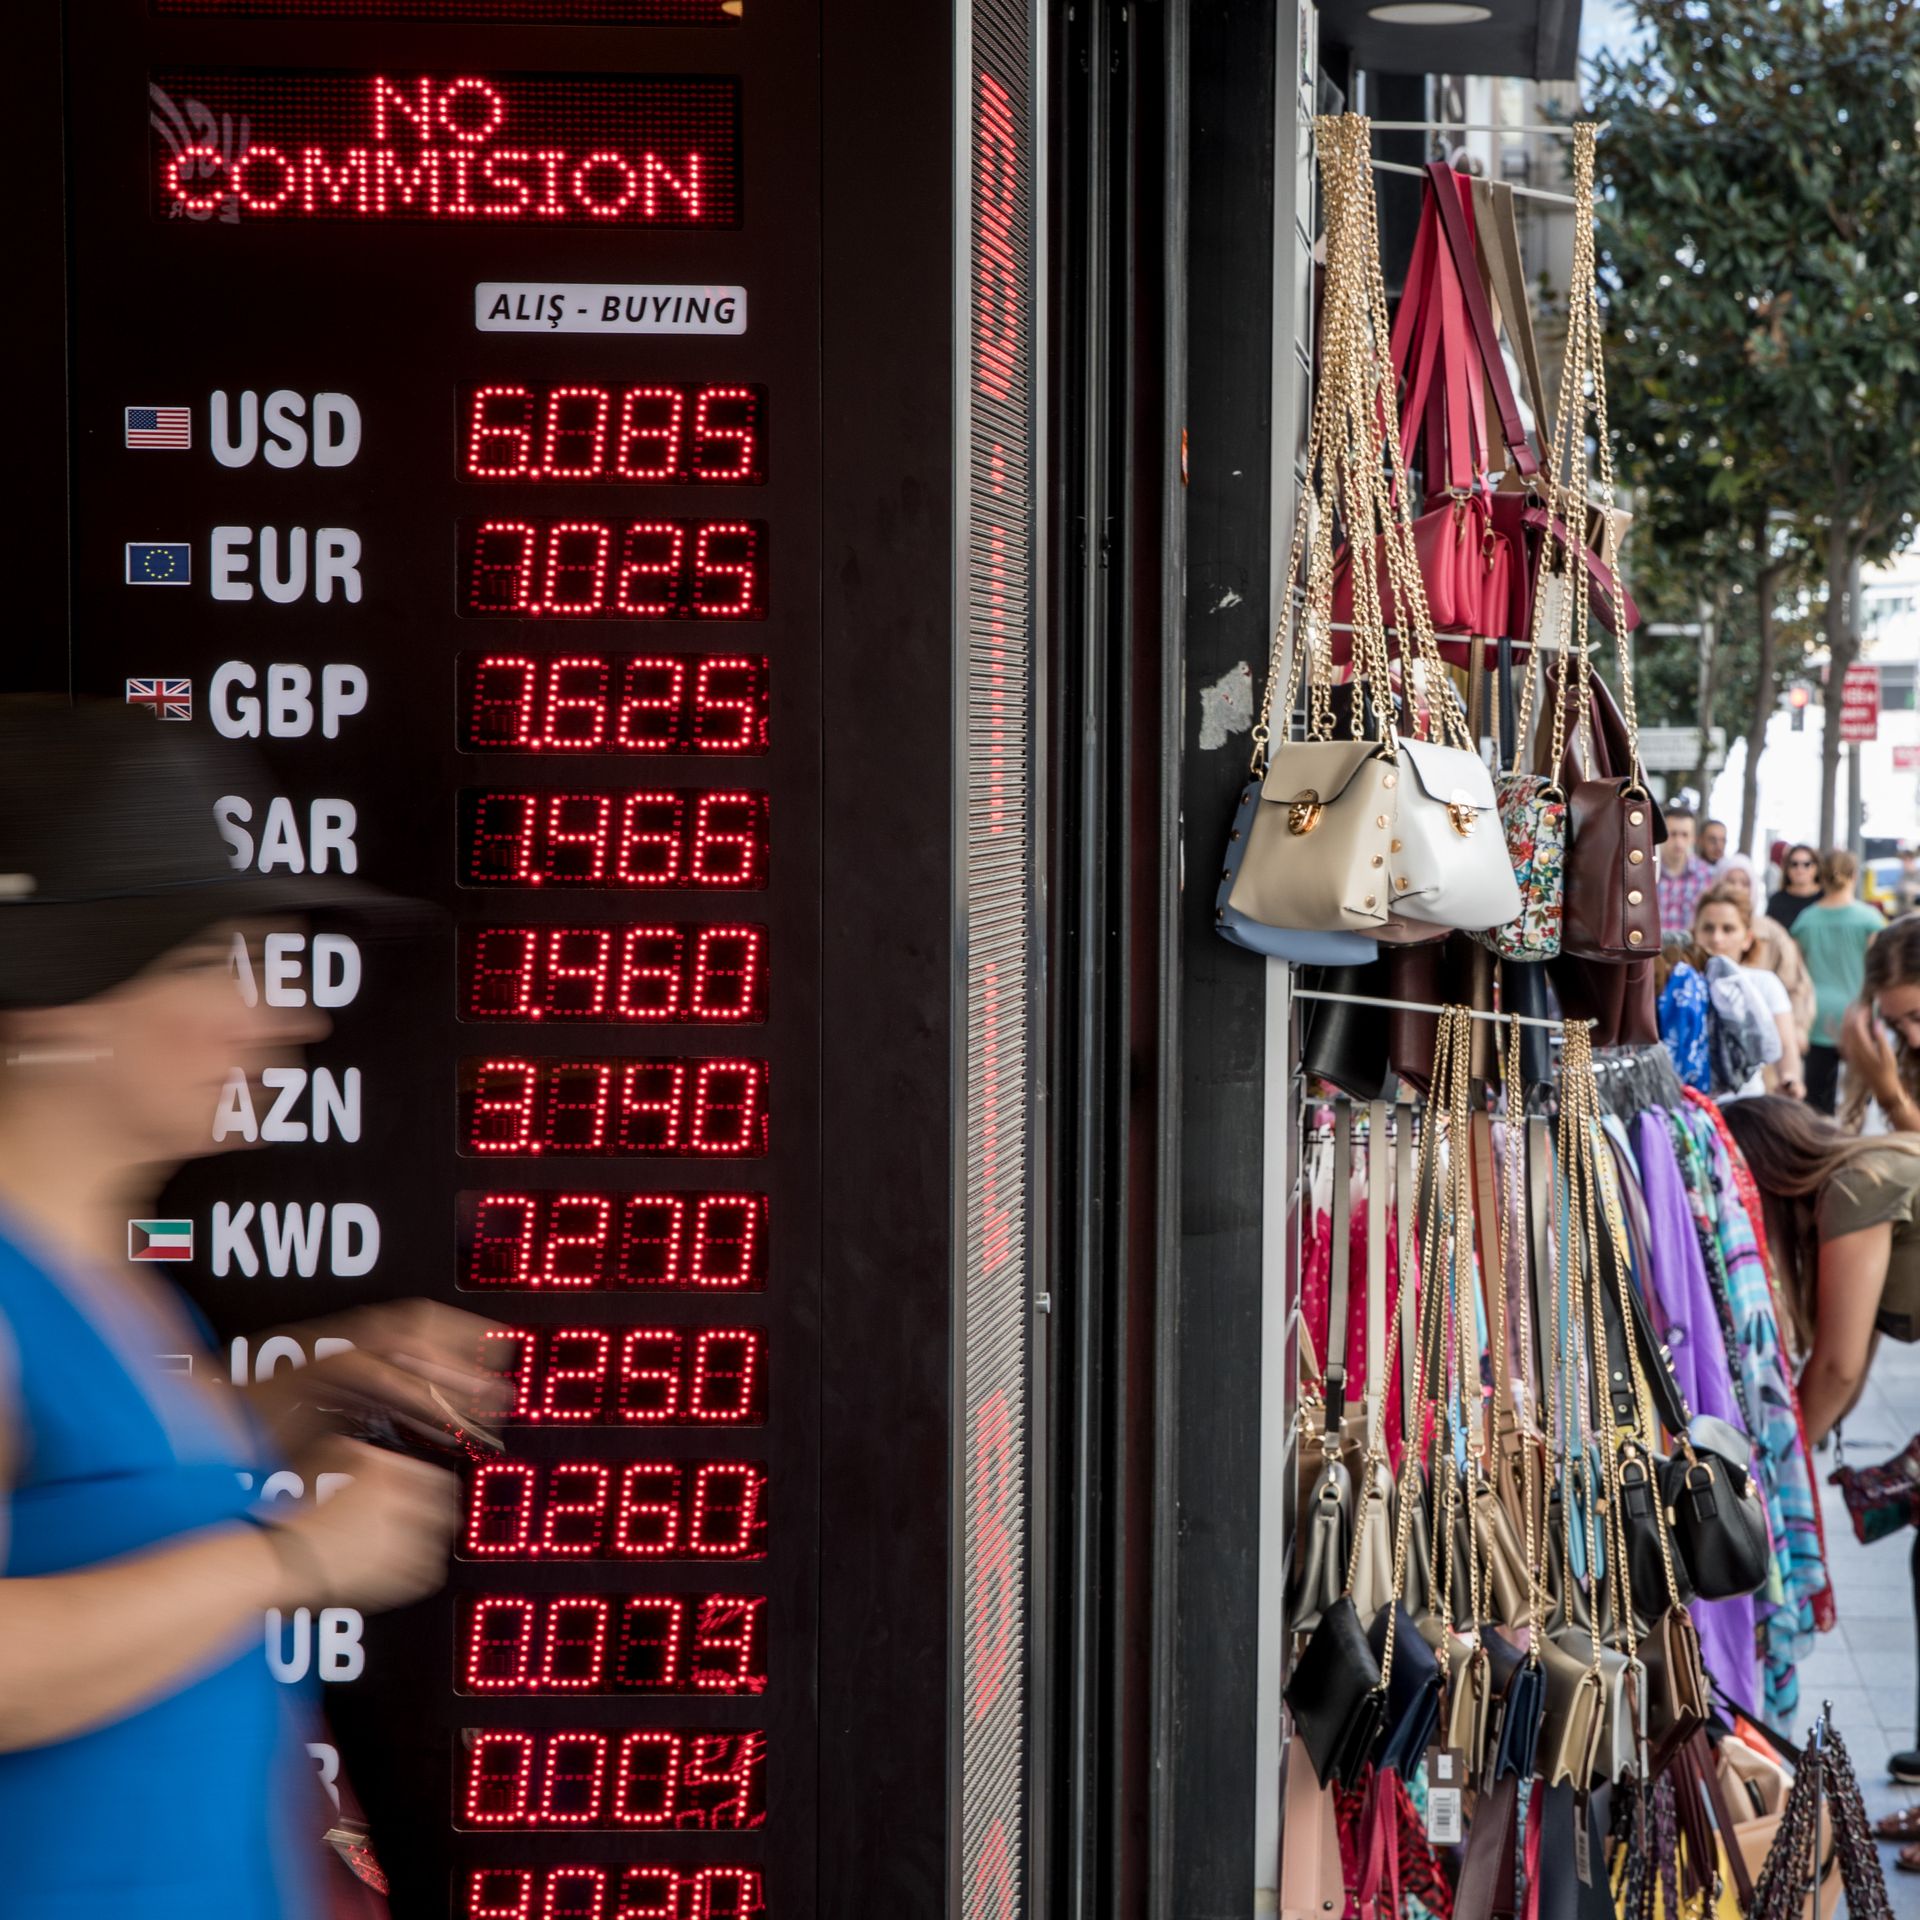 People walk past a currency exchange shop on August 14, 2018 in Istanbul, Turkey. 